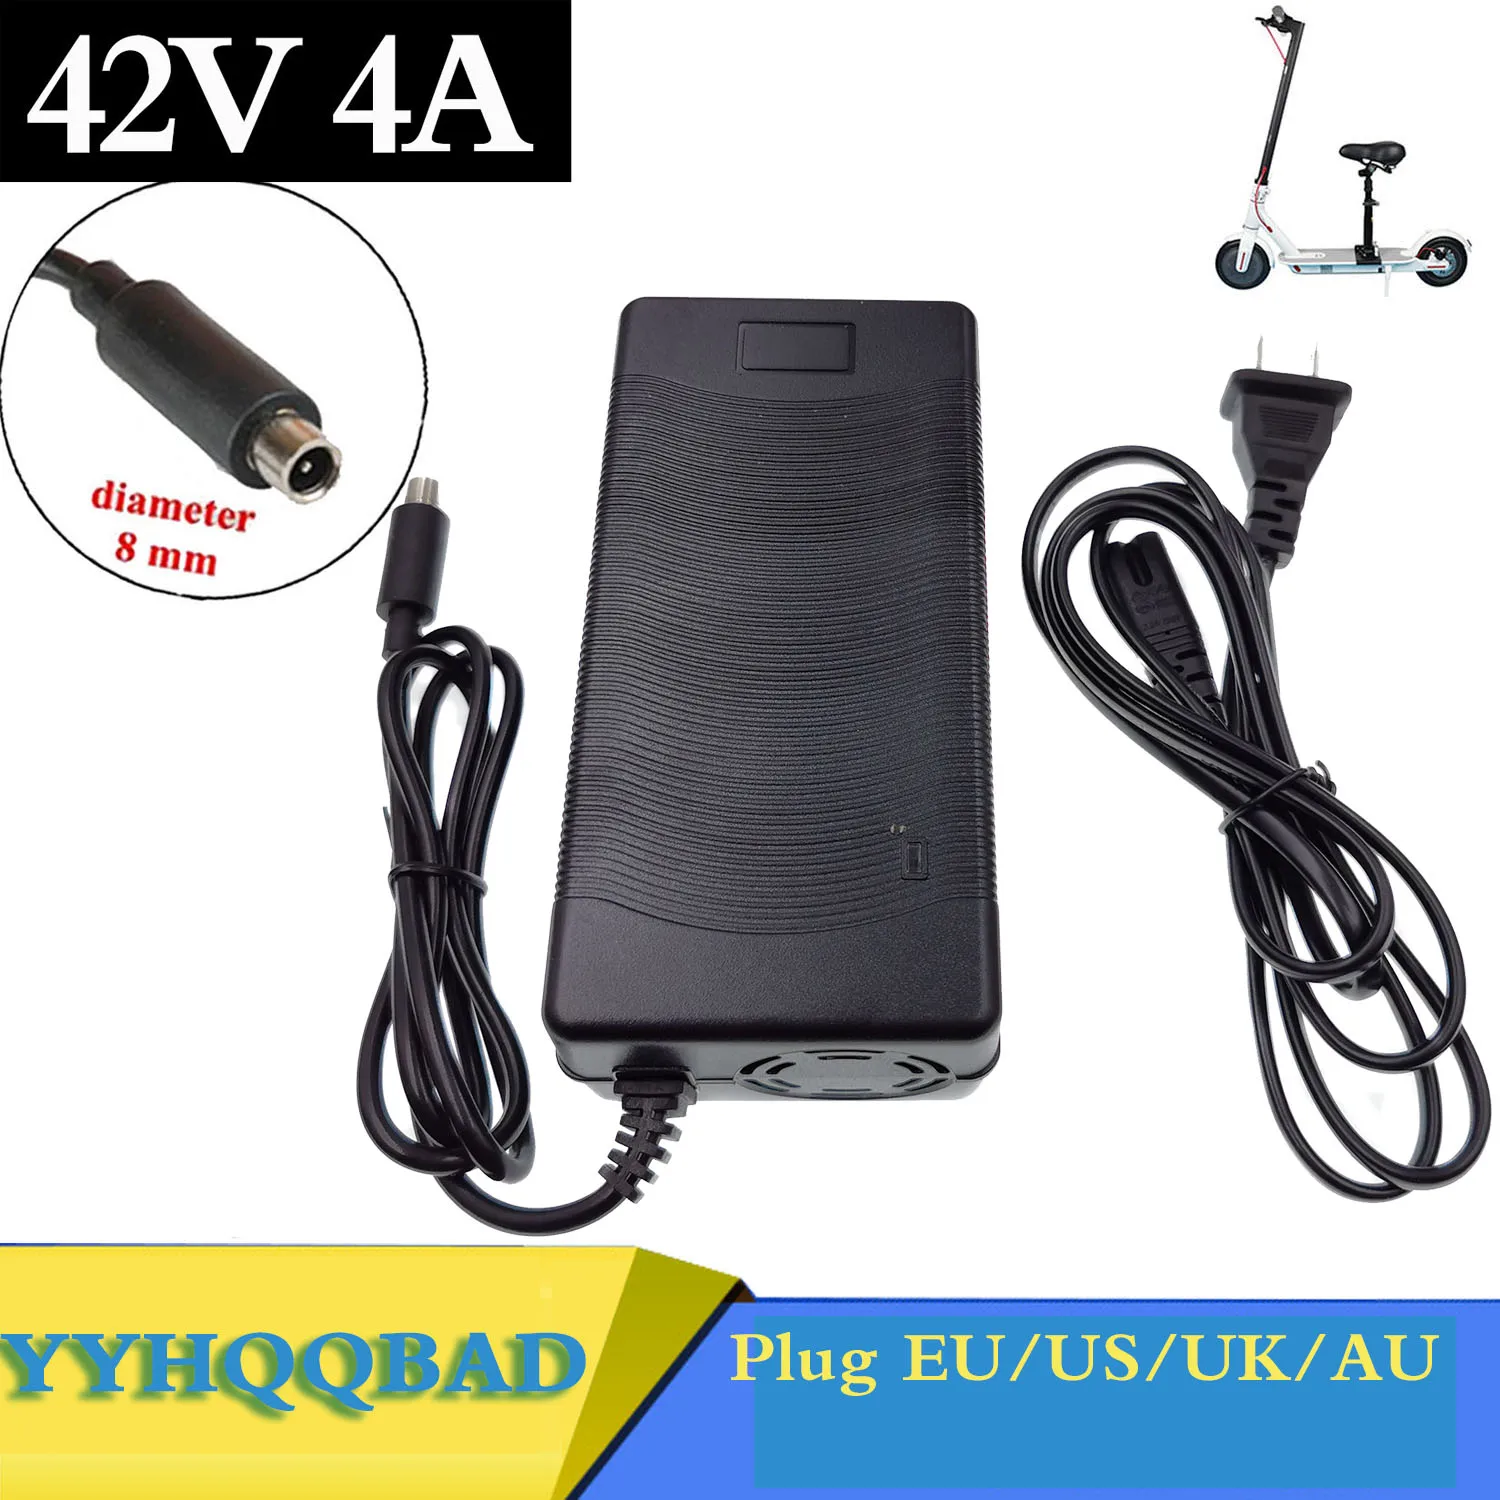 42V 4A Scooter charger Battery Power Supply Adapters Use For Mijia M365 Electric Scooter Skateboard Accessories